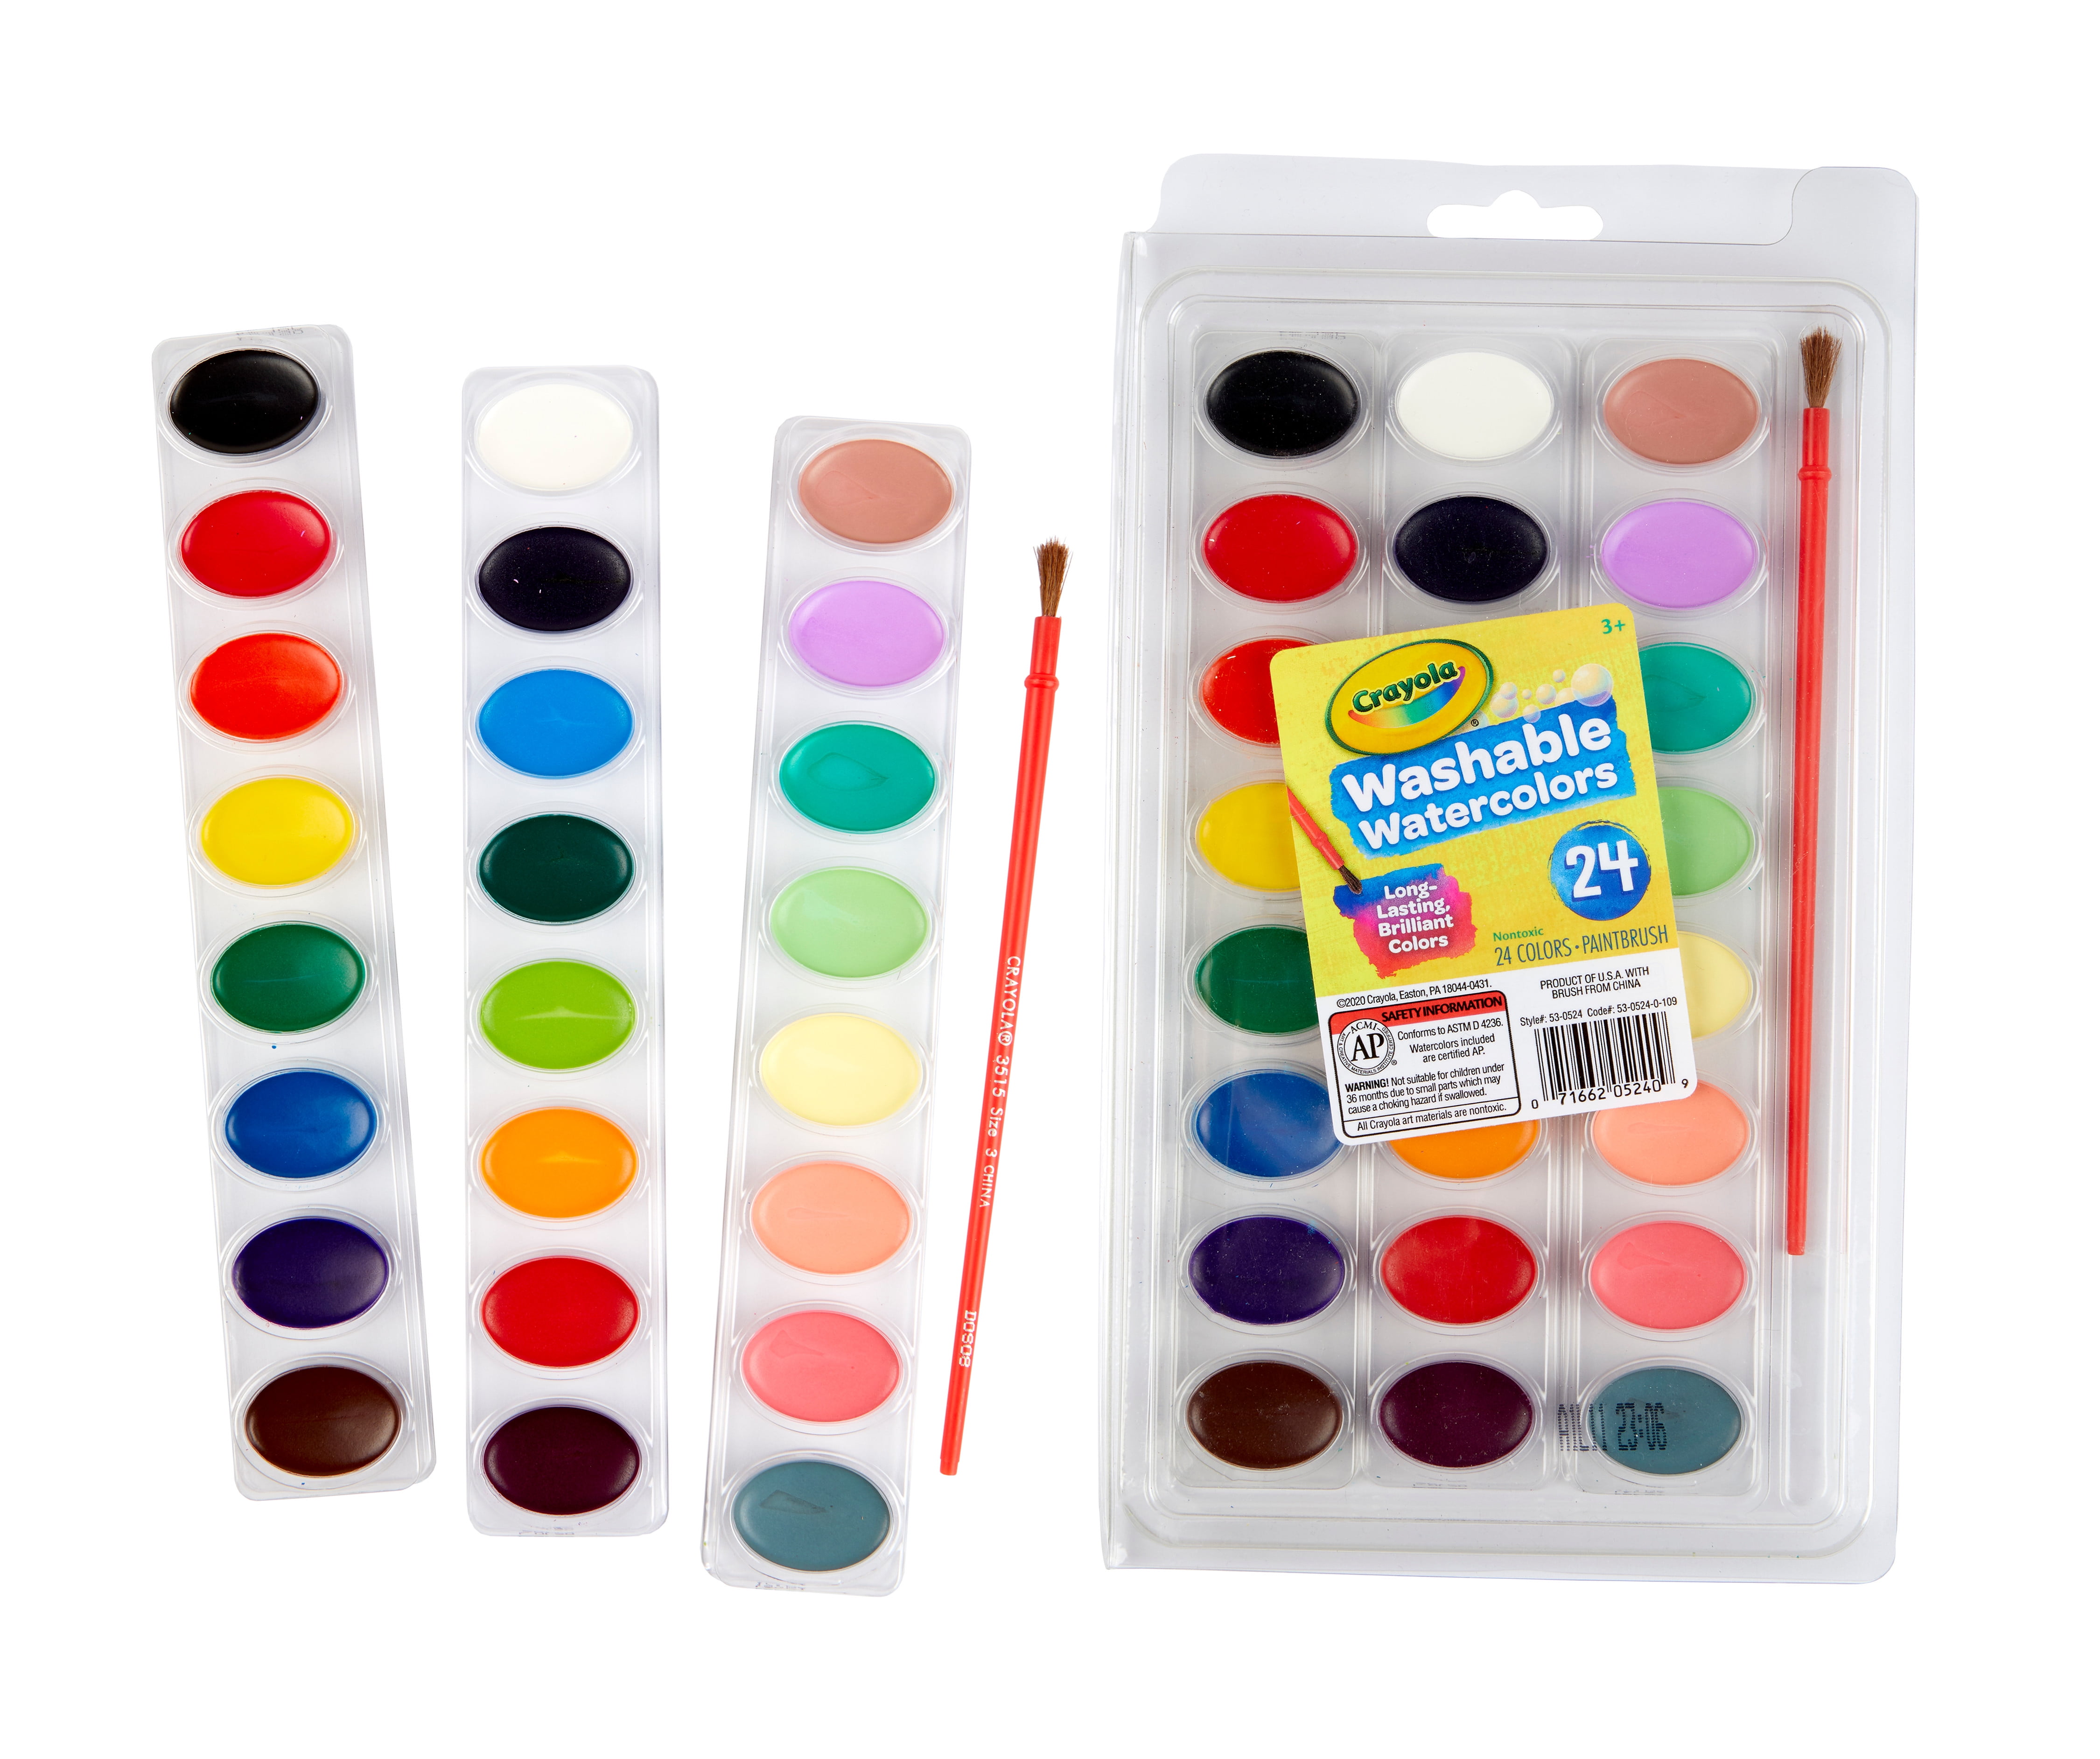 Washable Watercolor Pans with Plastic Handled Brush, 24 Colors - BIN530524, Crayola Llc